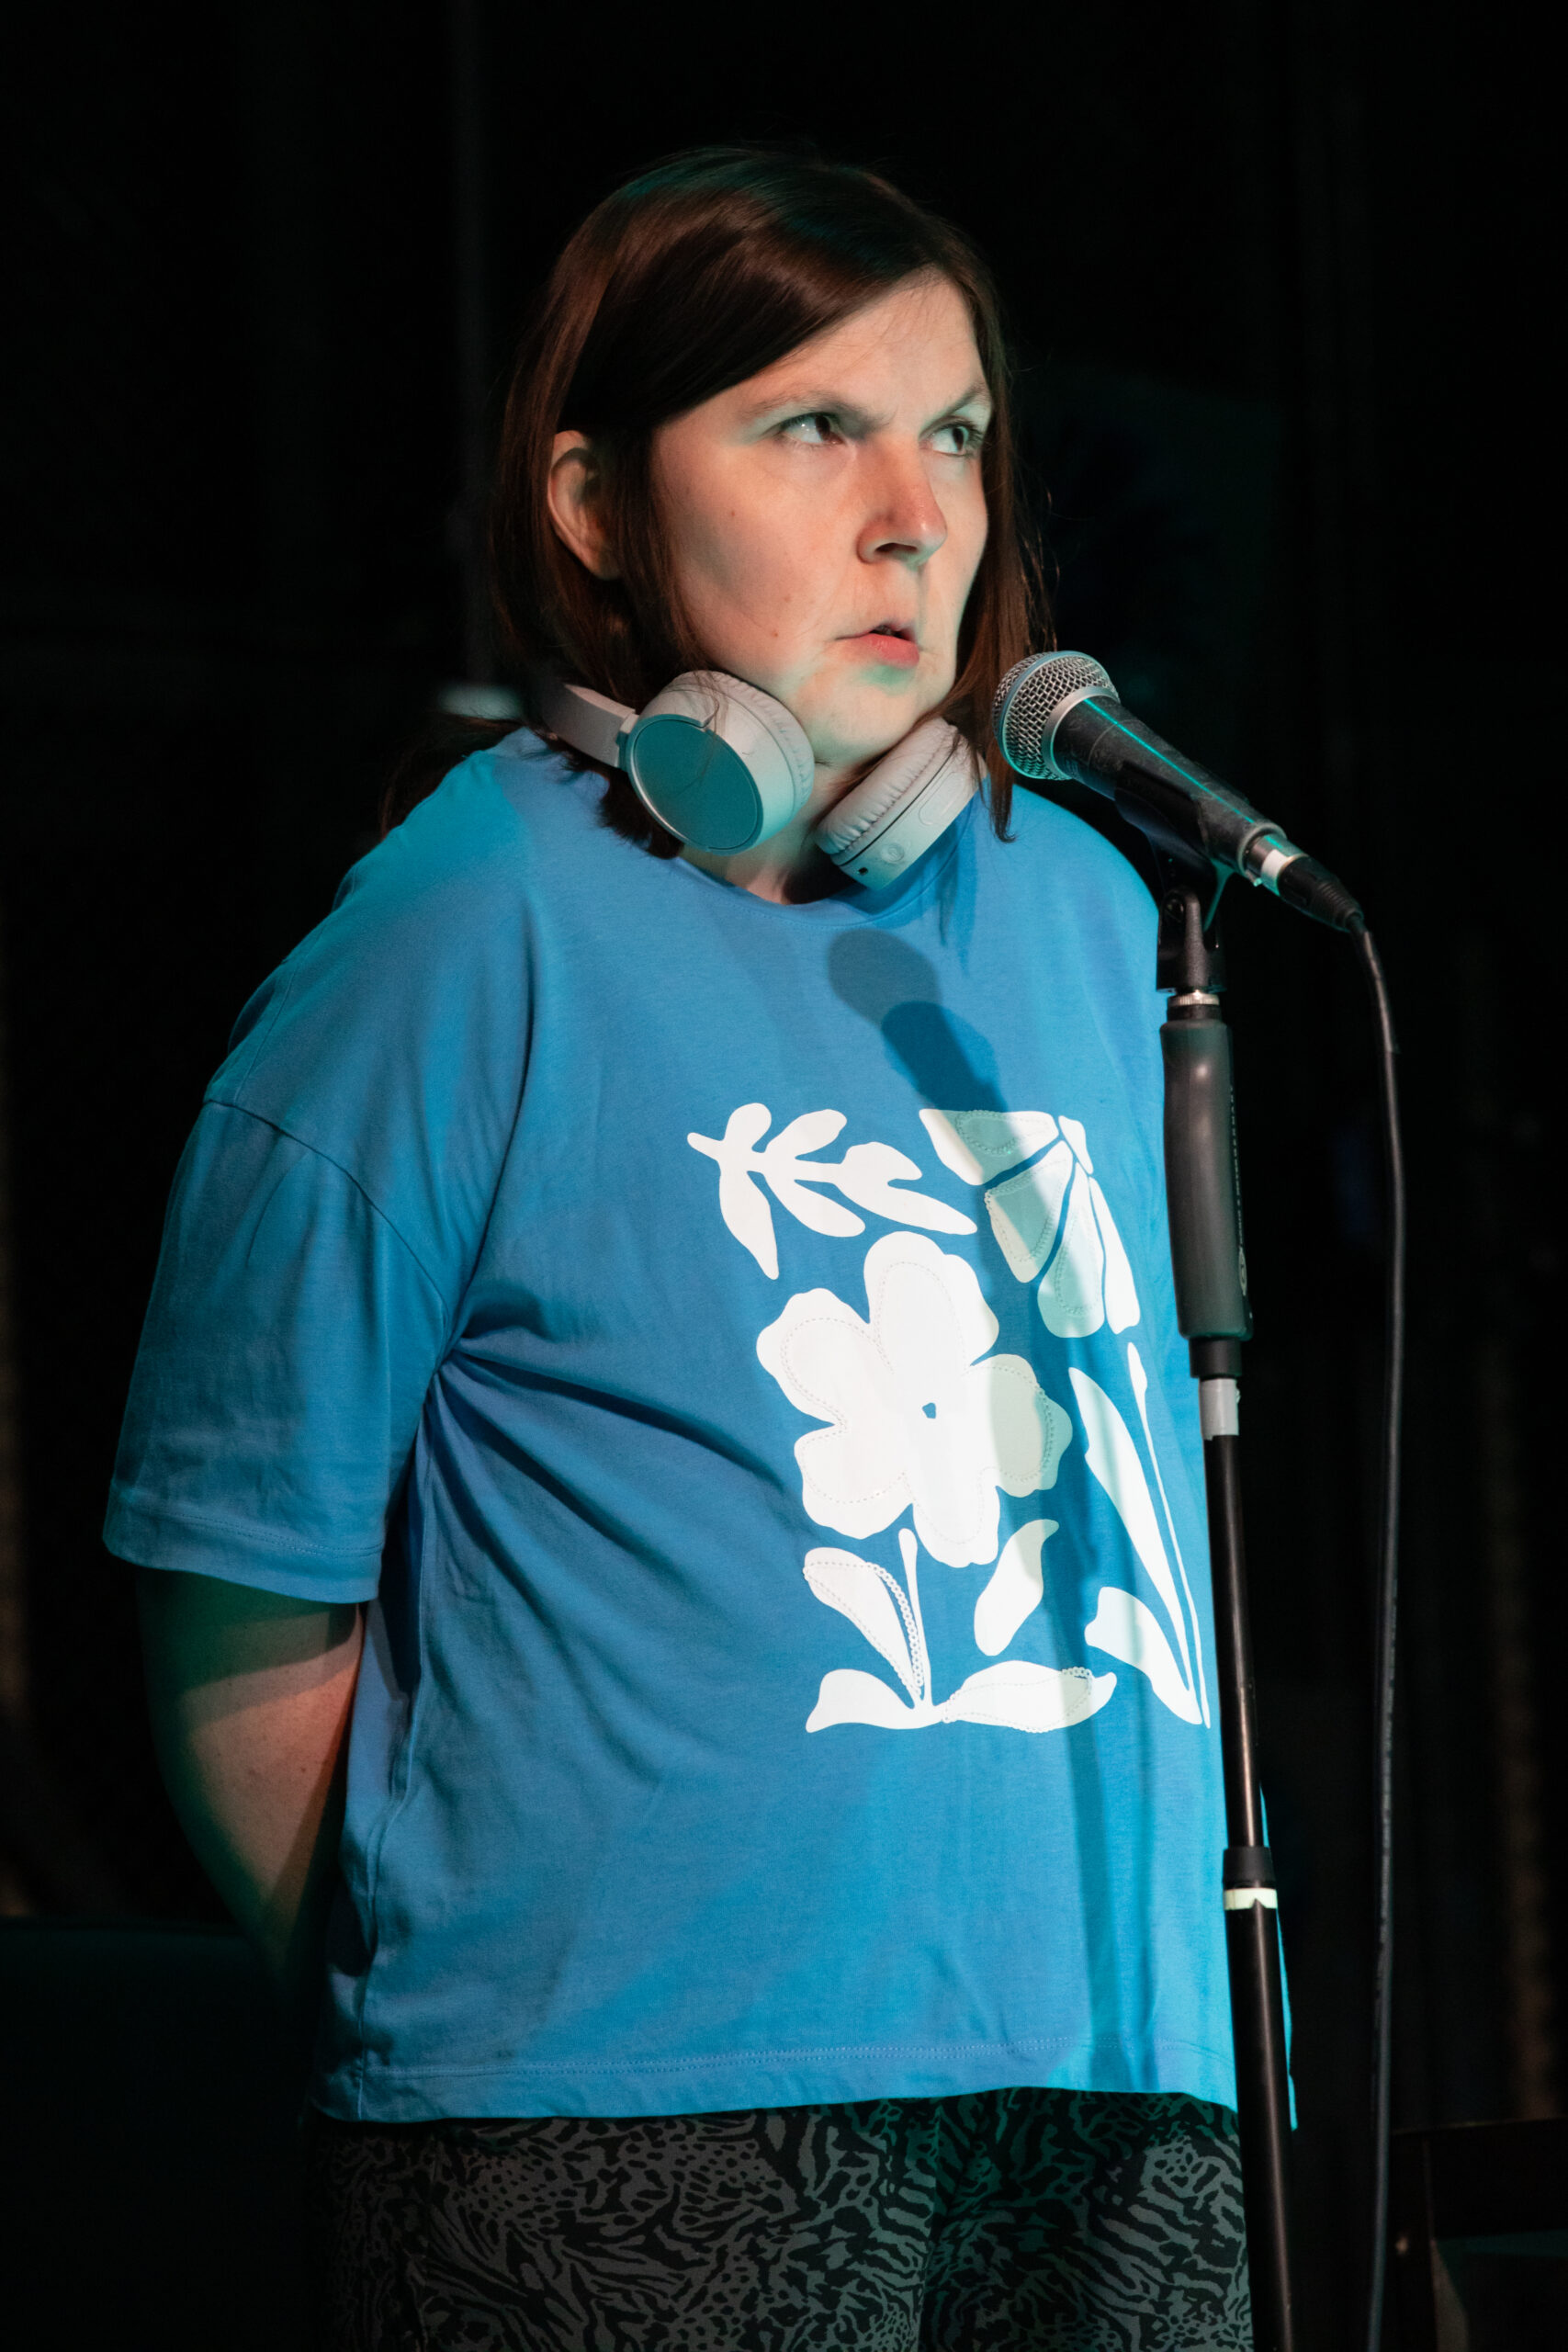 A white woman with dark brown shoulder-length hair, a blue t-shirt with a white floral design stands in a dark space behind a microphone, her hands joined behind her back. She has a pair of grey headpho﻿nes around her neck. She as a dubious look on her face.